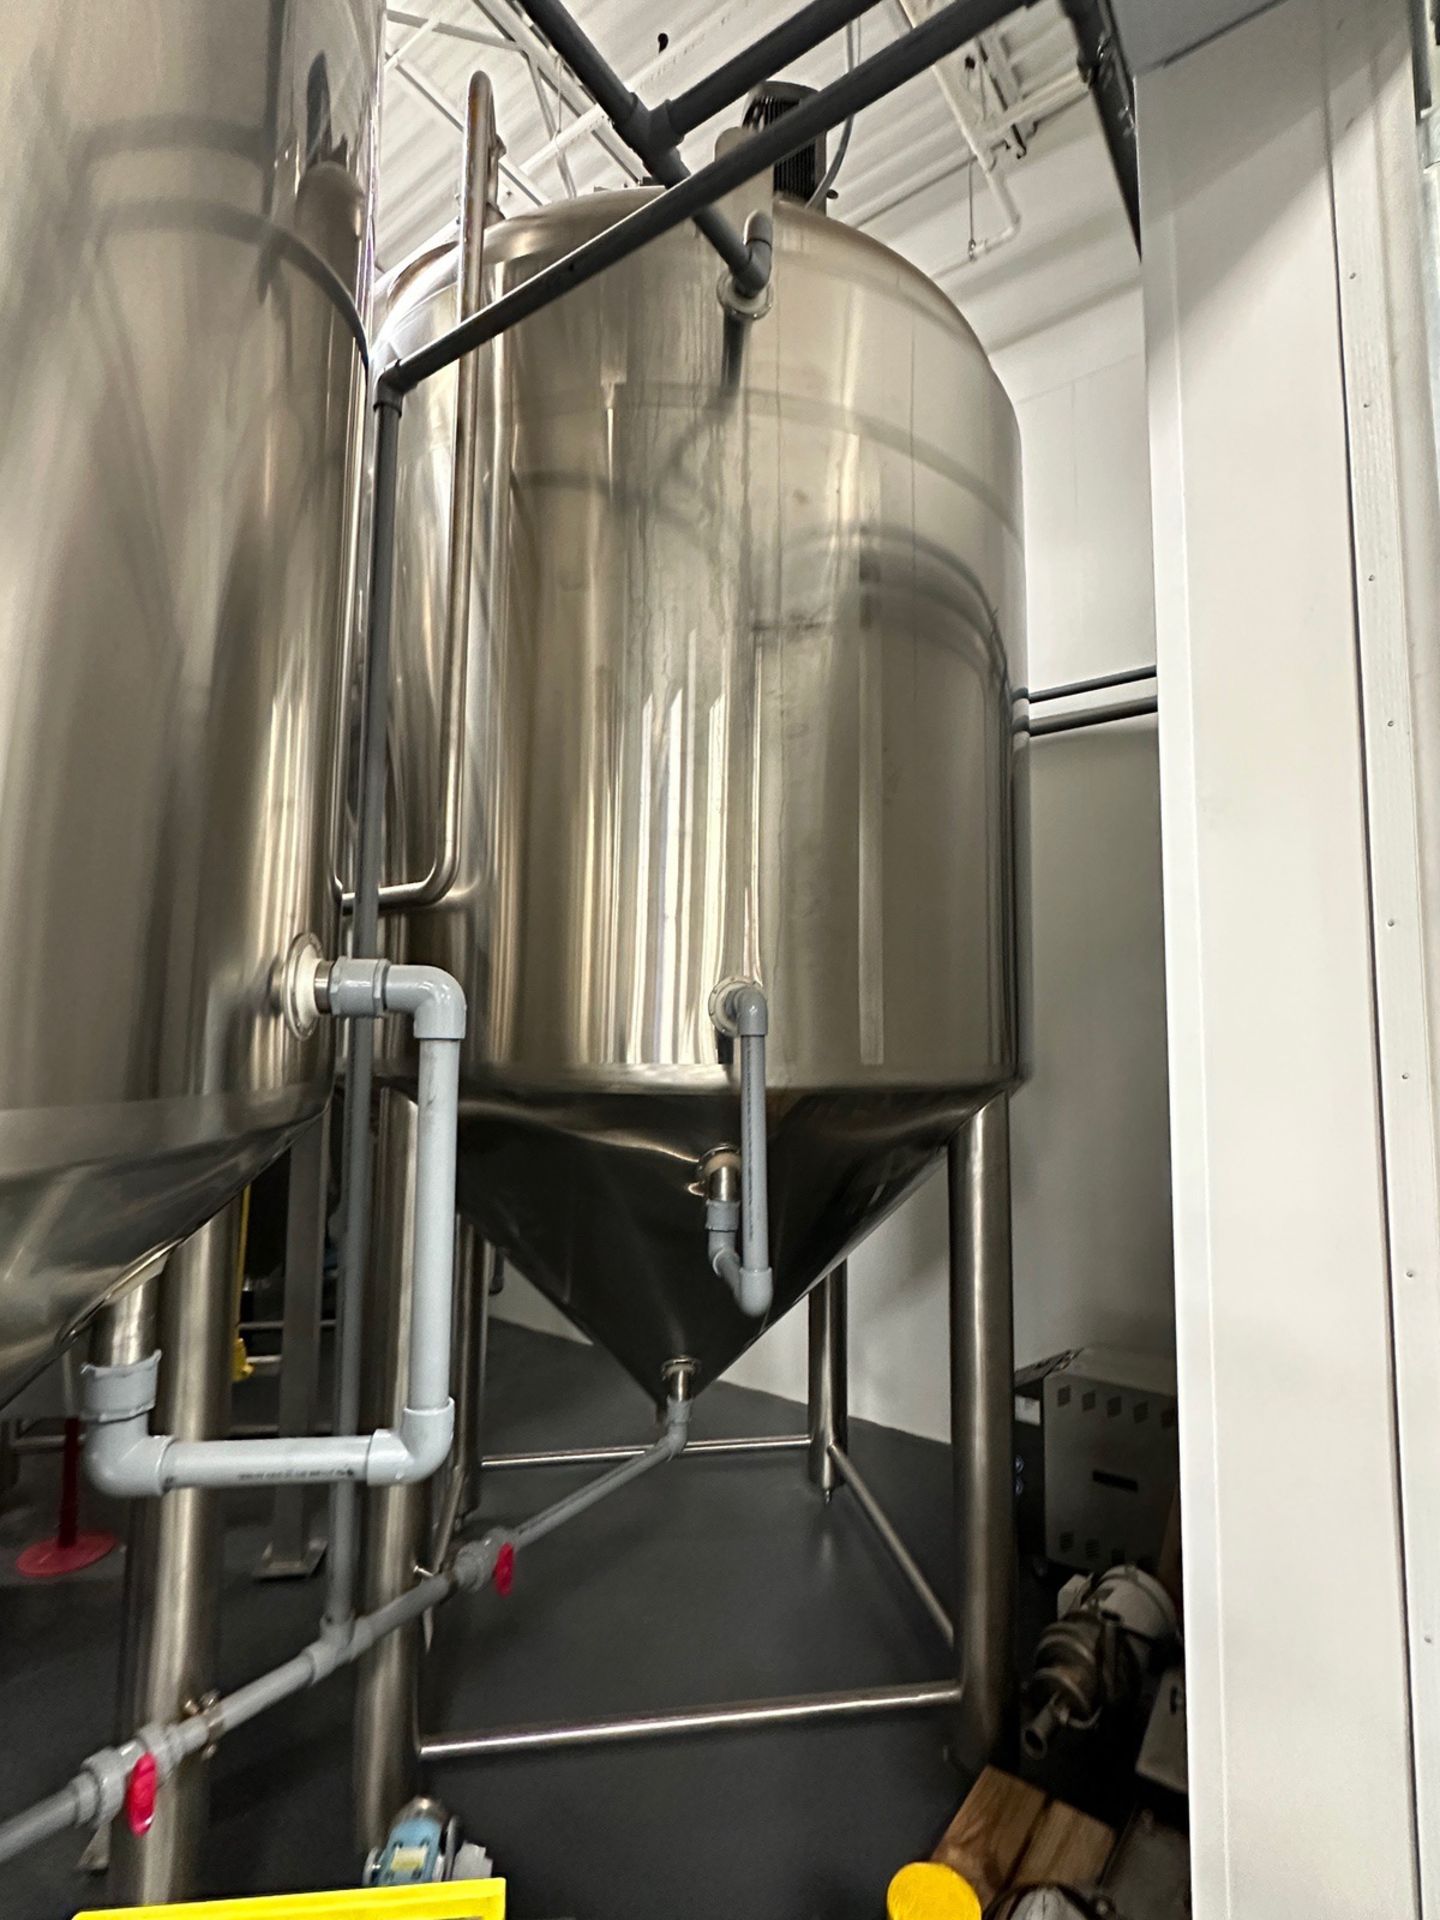 Anco 2,000 Gallon Stainless Steel Tank - Cone Bottom, Glycol Jacketed, Top Mounted Agitation with - Image 5 of 7